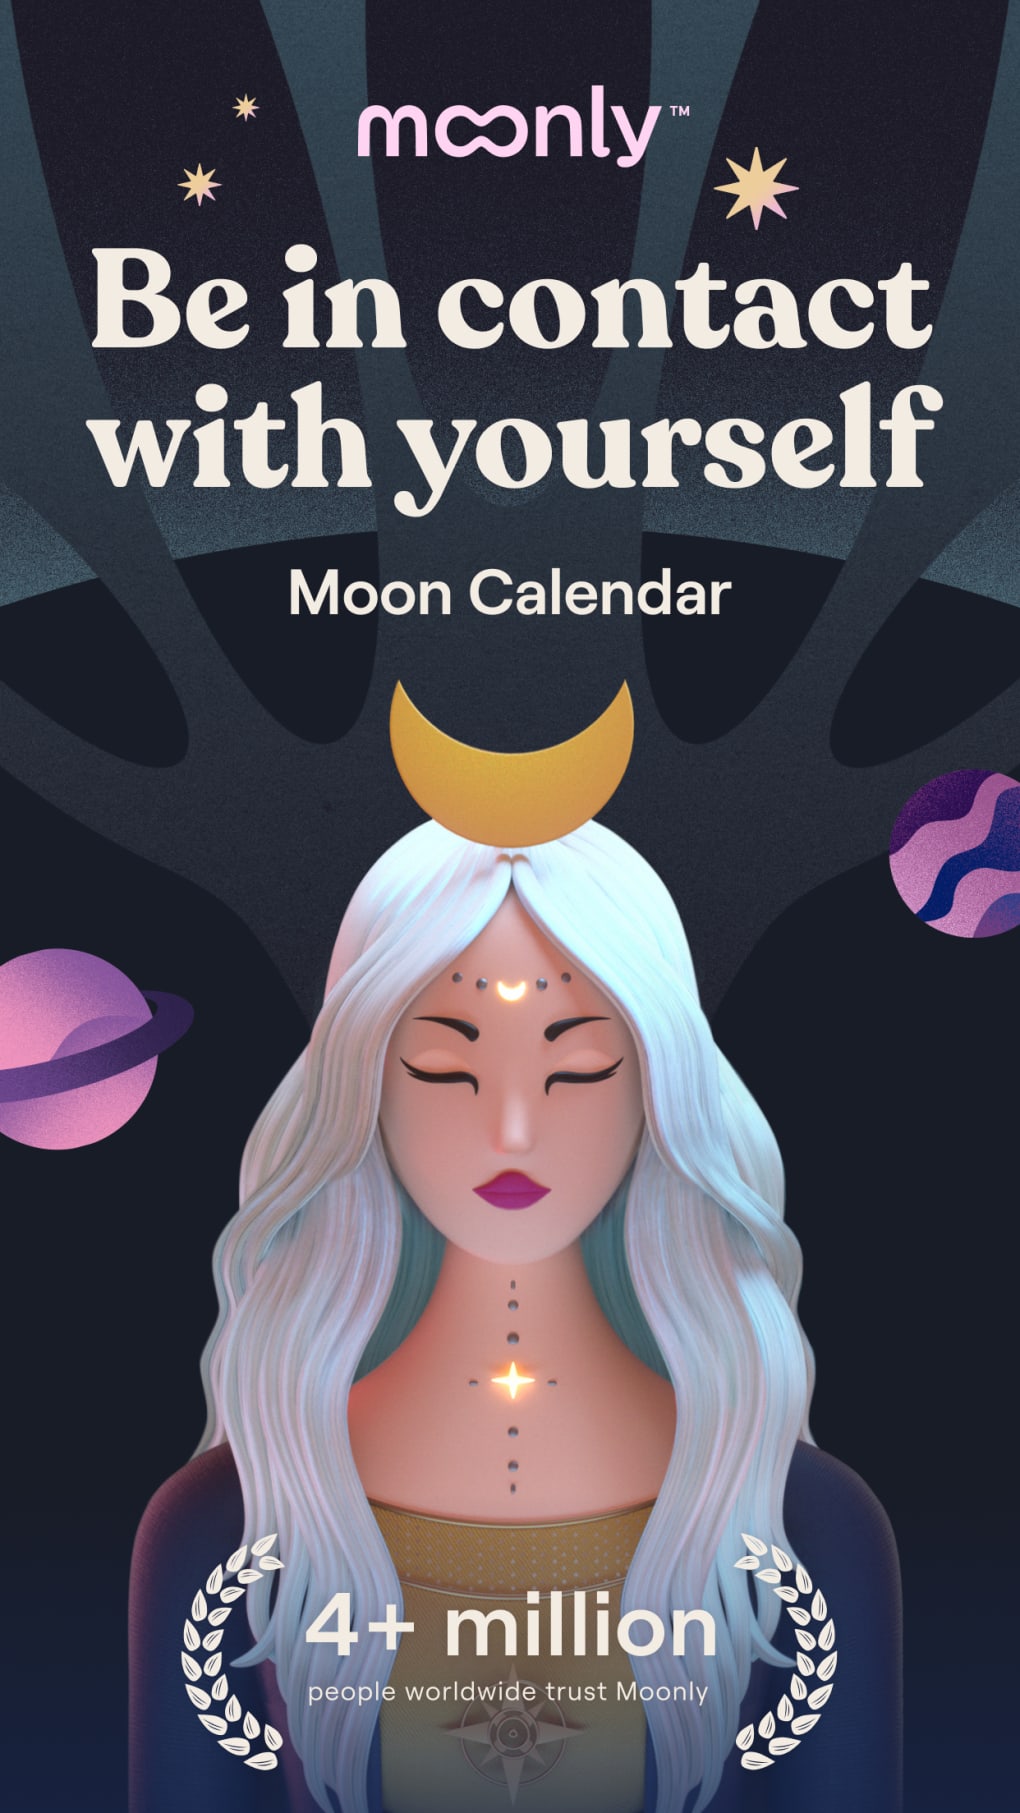 Moonly App The Moon Calendar for iPhone 無料・ダウンロード